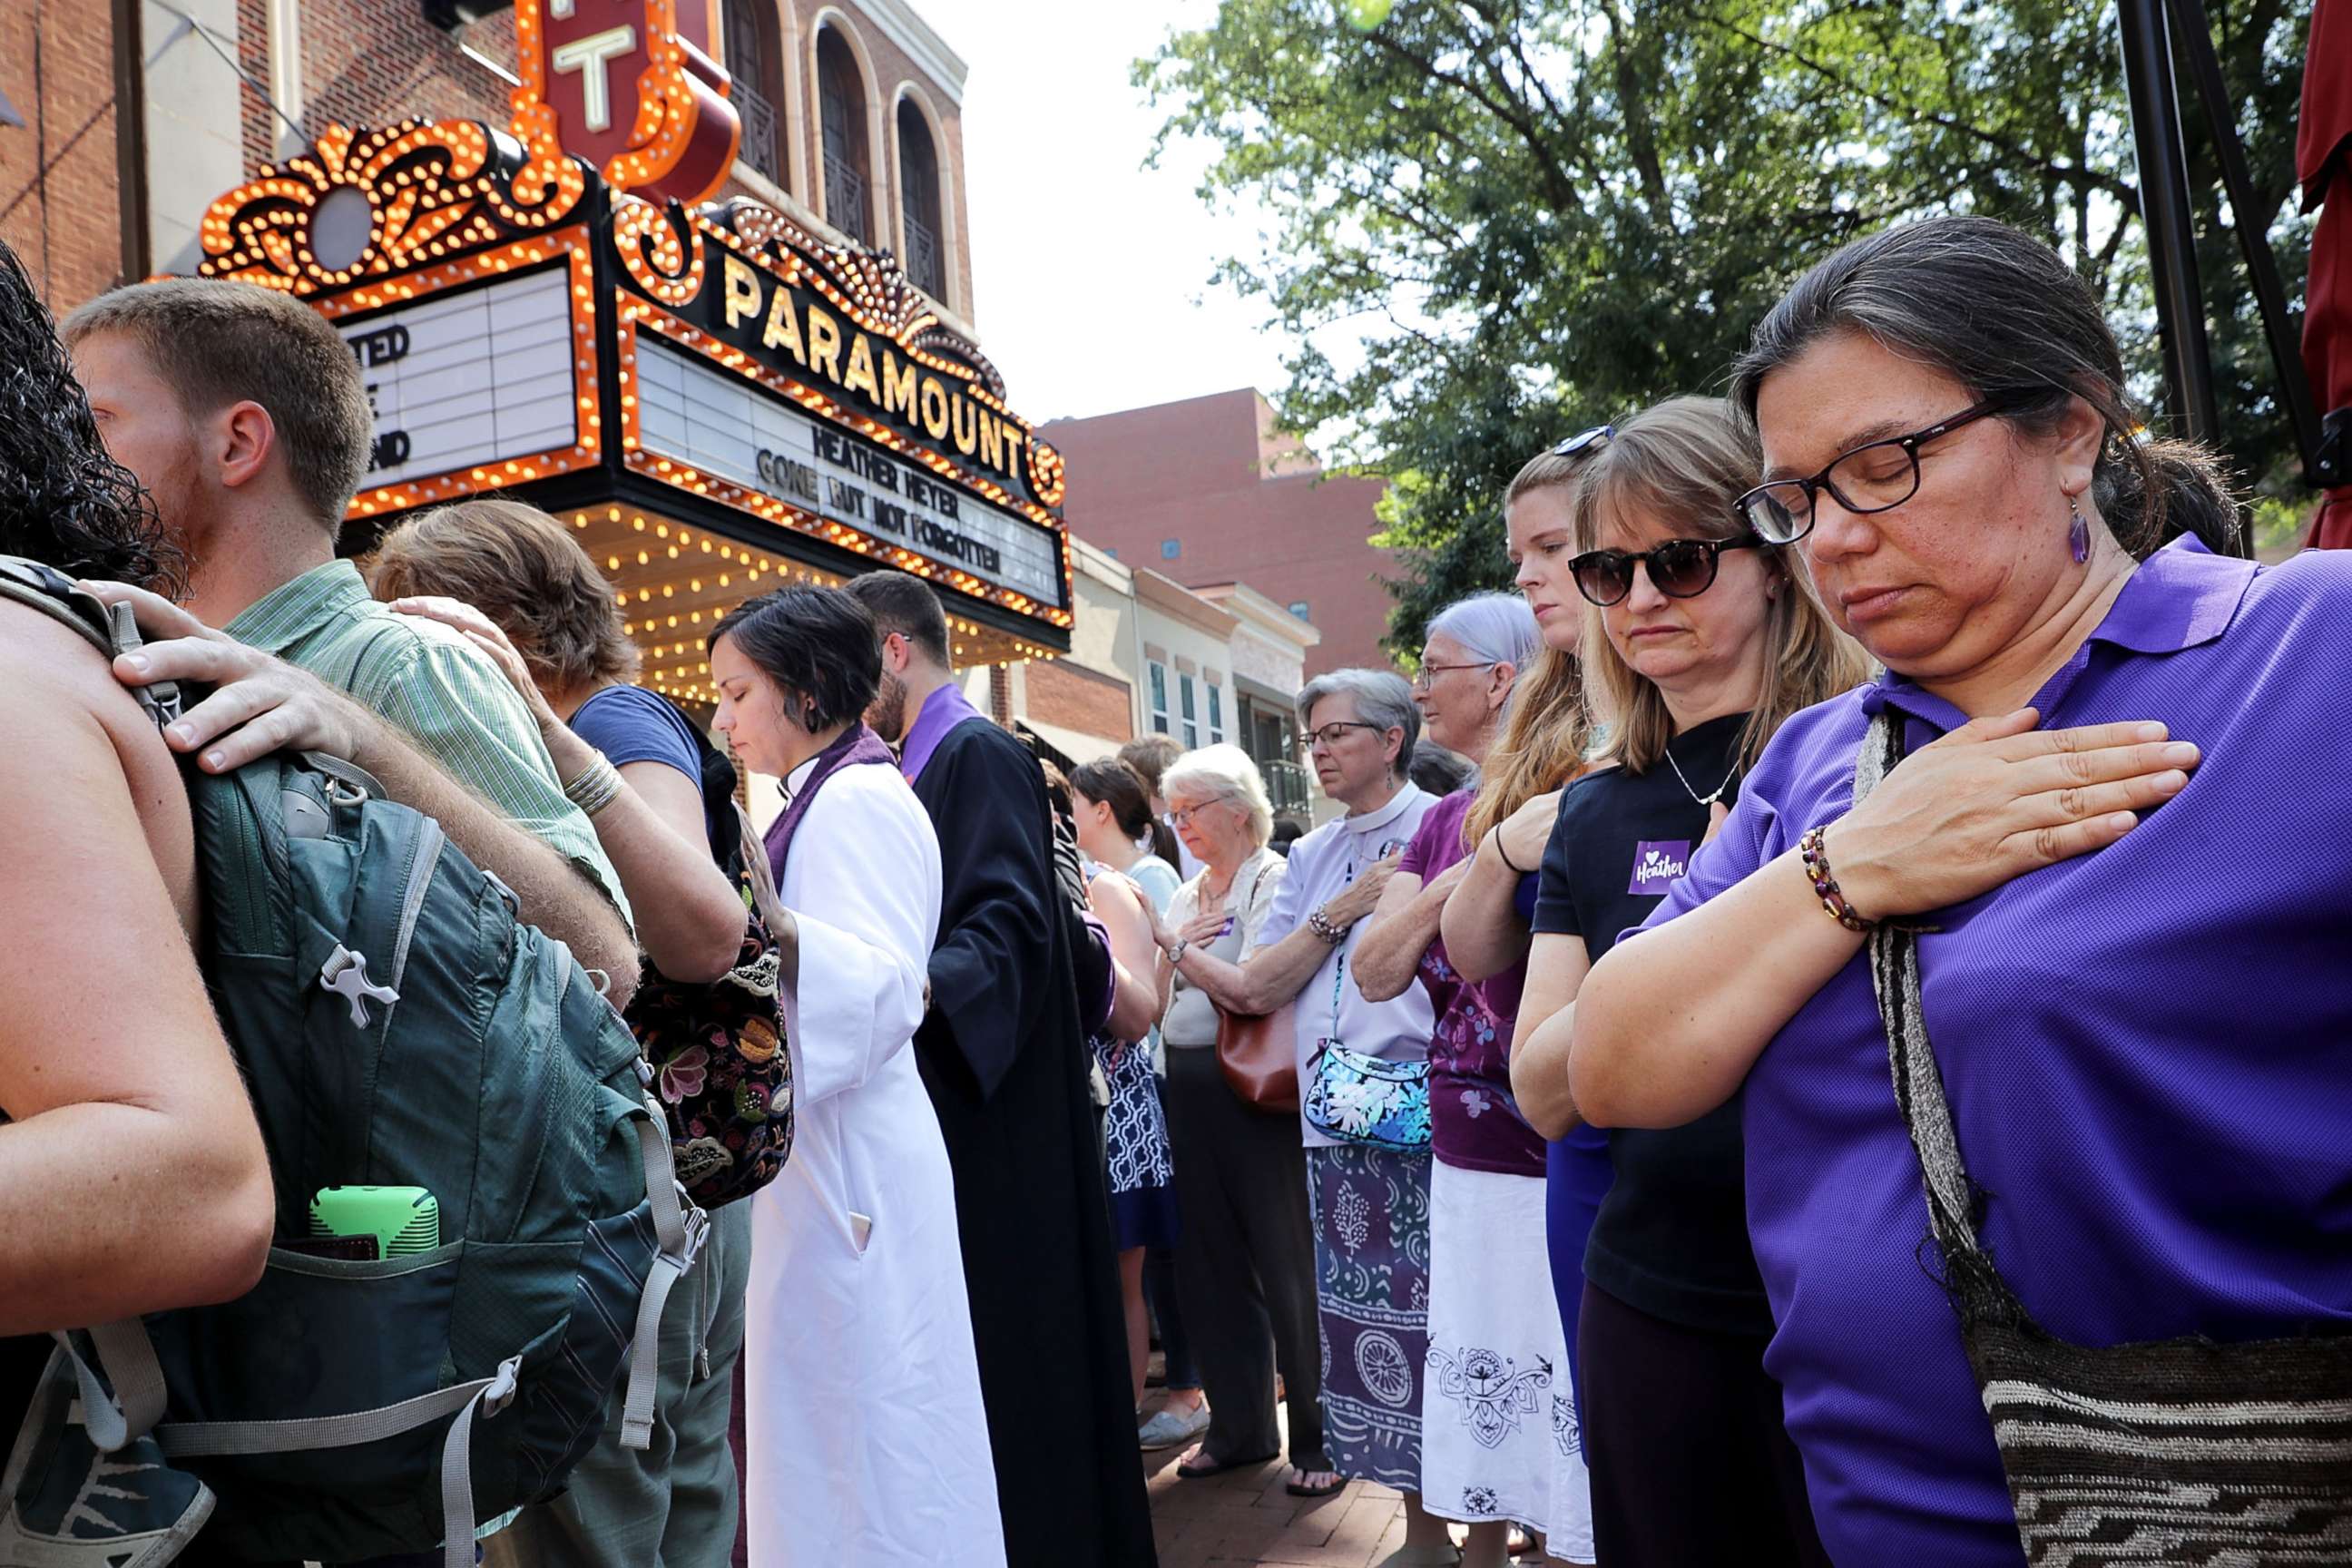 PHOTO: People observe a moment of silence during the memorial service for Heather Heyer outside the Paramount Theater, Aug. 16, 2017, in Charlottesville, Va.